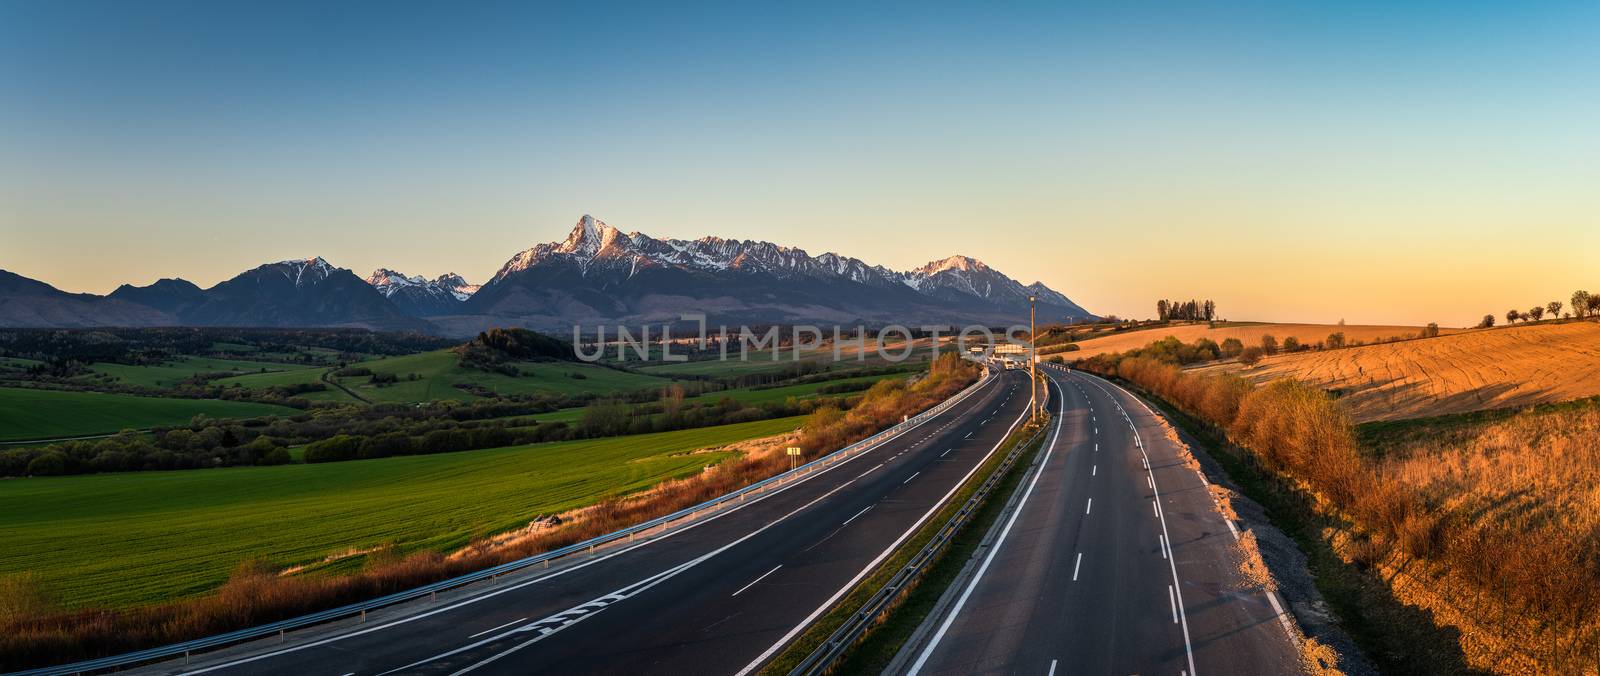 Panorama view of the High Tatra mountains with mount Krivan and a local highway in Slovakia at sunset